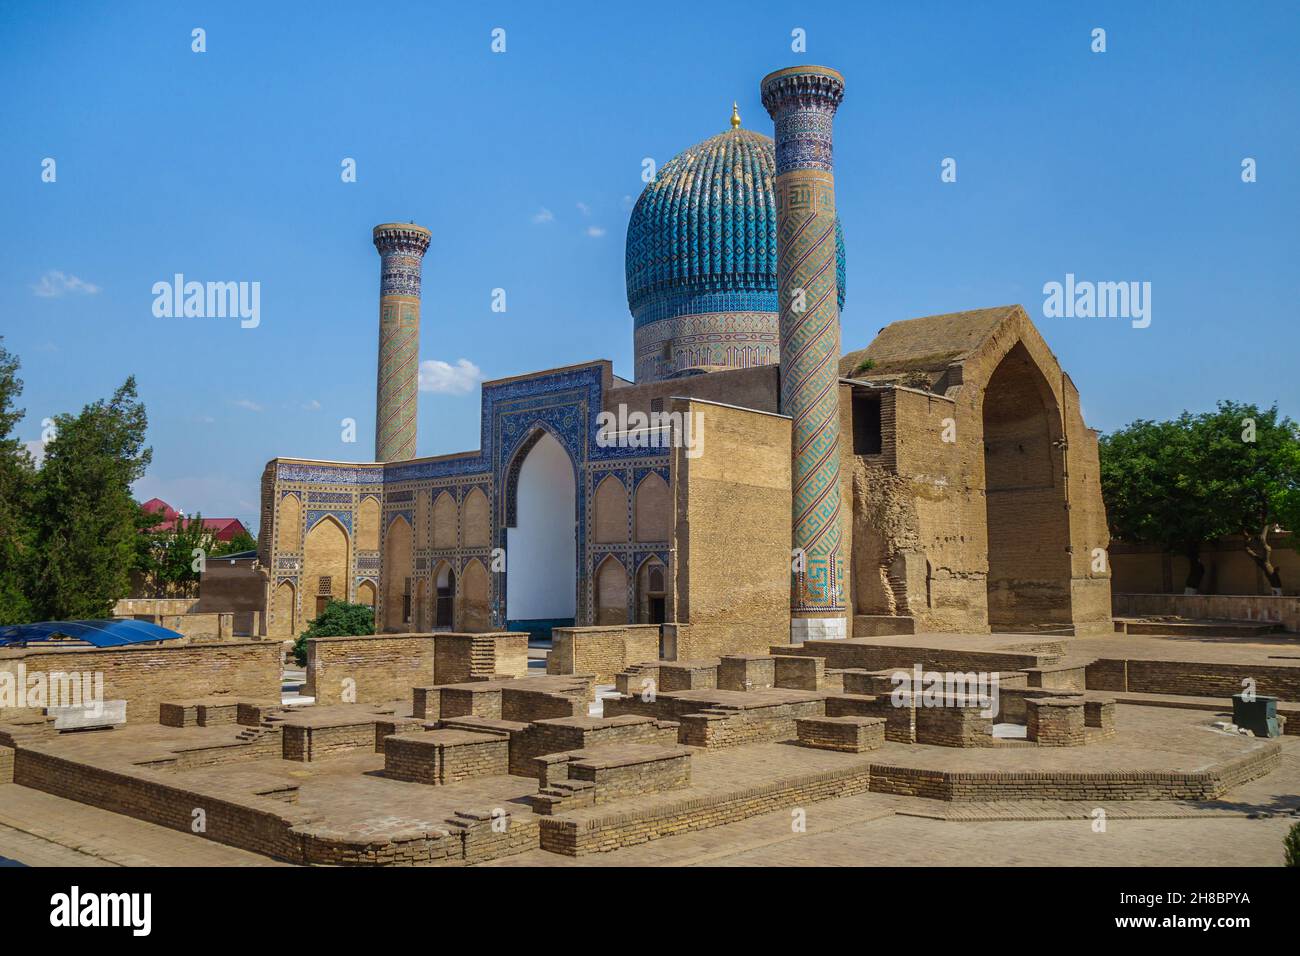 Panorama of Gur-e-Amir, mausoleum of Timur (Tamerlane), Samarkand, Uzbekistan. Remains of ancient buildings in the foreground. Complex built in 1403. Stock Photo